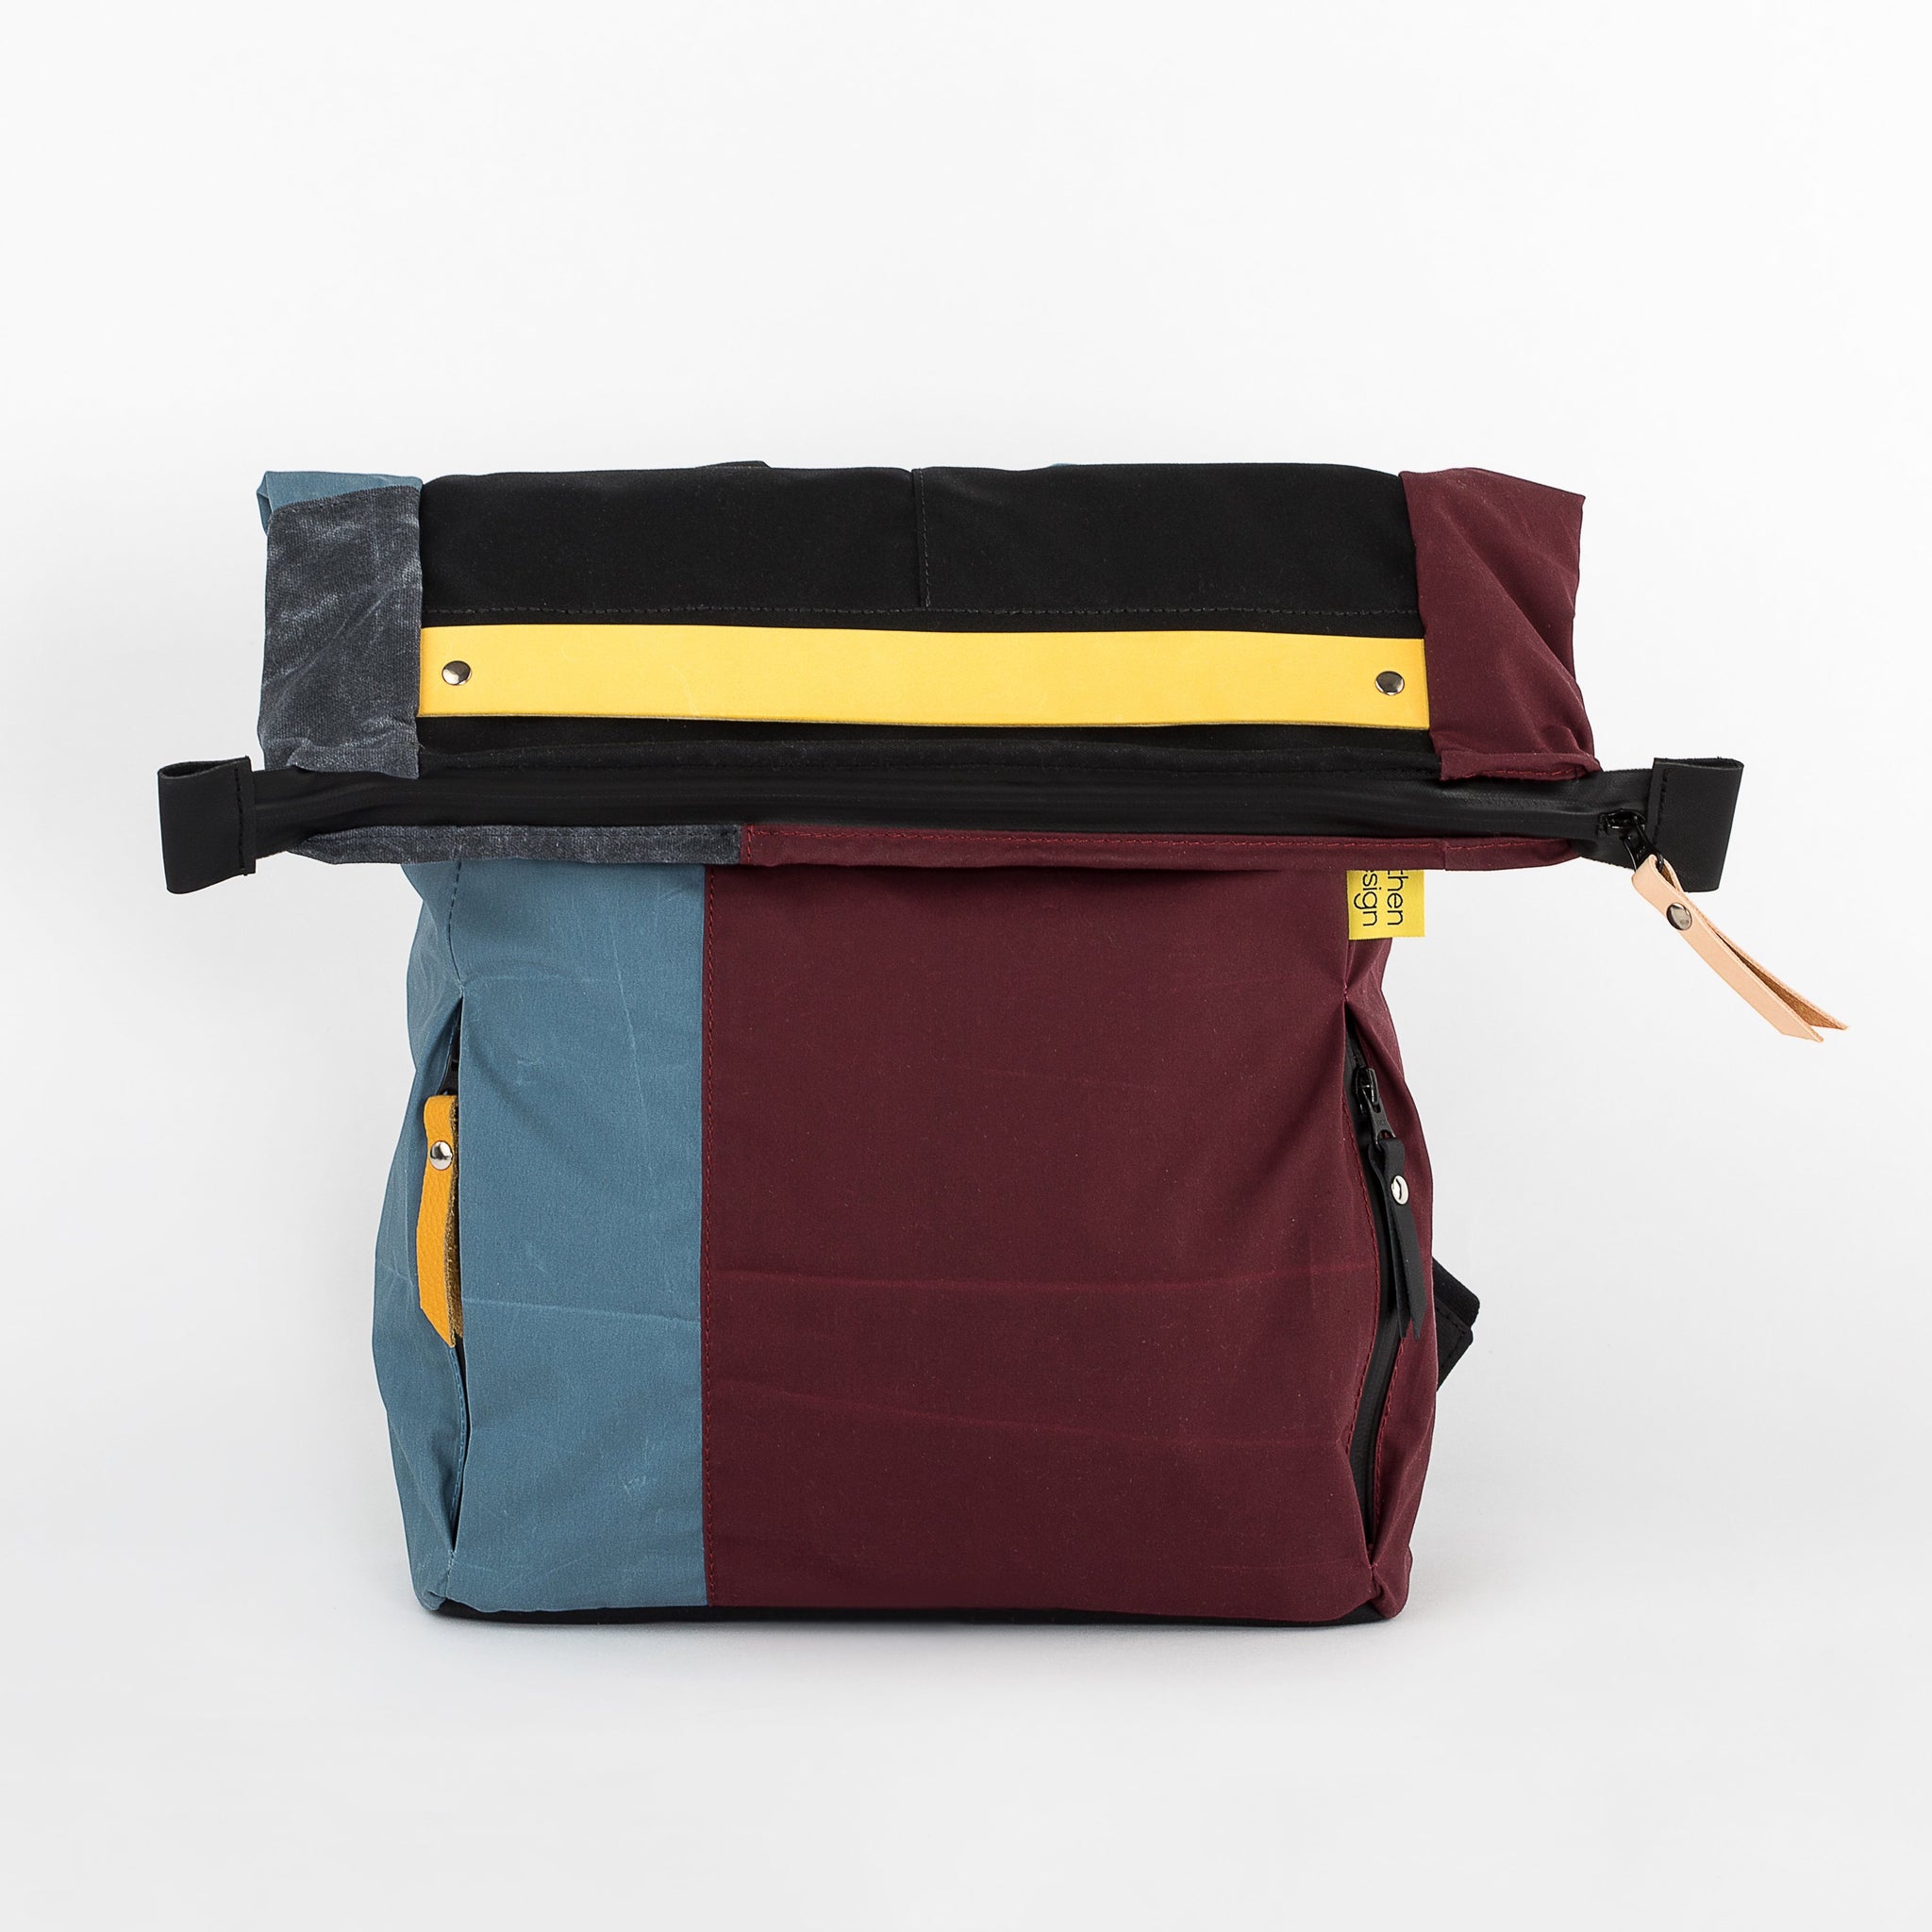 andthen.design an evolution of Vel-Oh.com-FlopTop | Backpack zero-1 colourblock backpack, colorblock backpack, odd straps, zero waste backpack, handmade backpack using off cuts